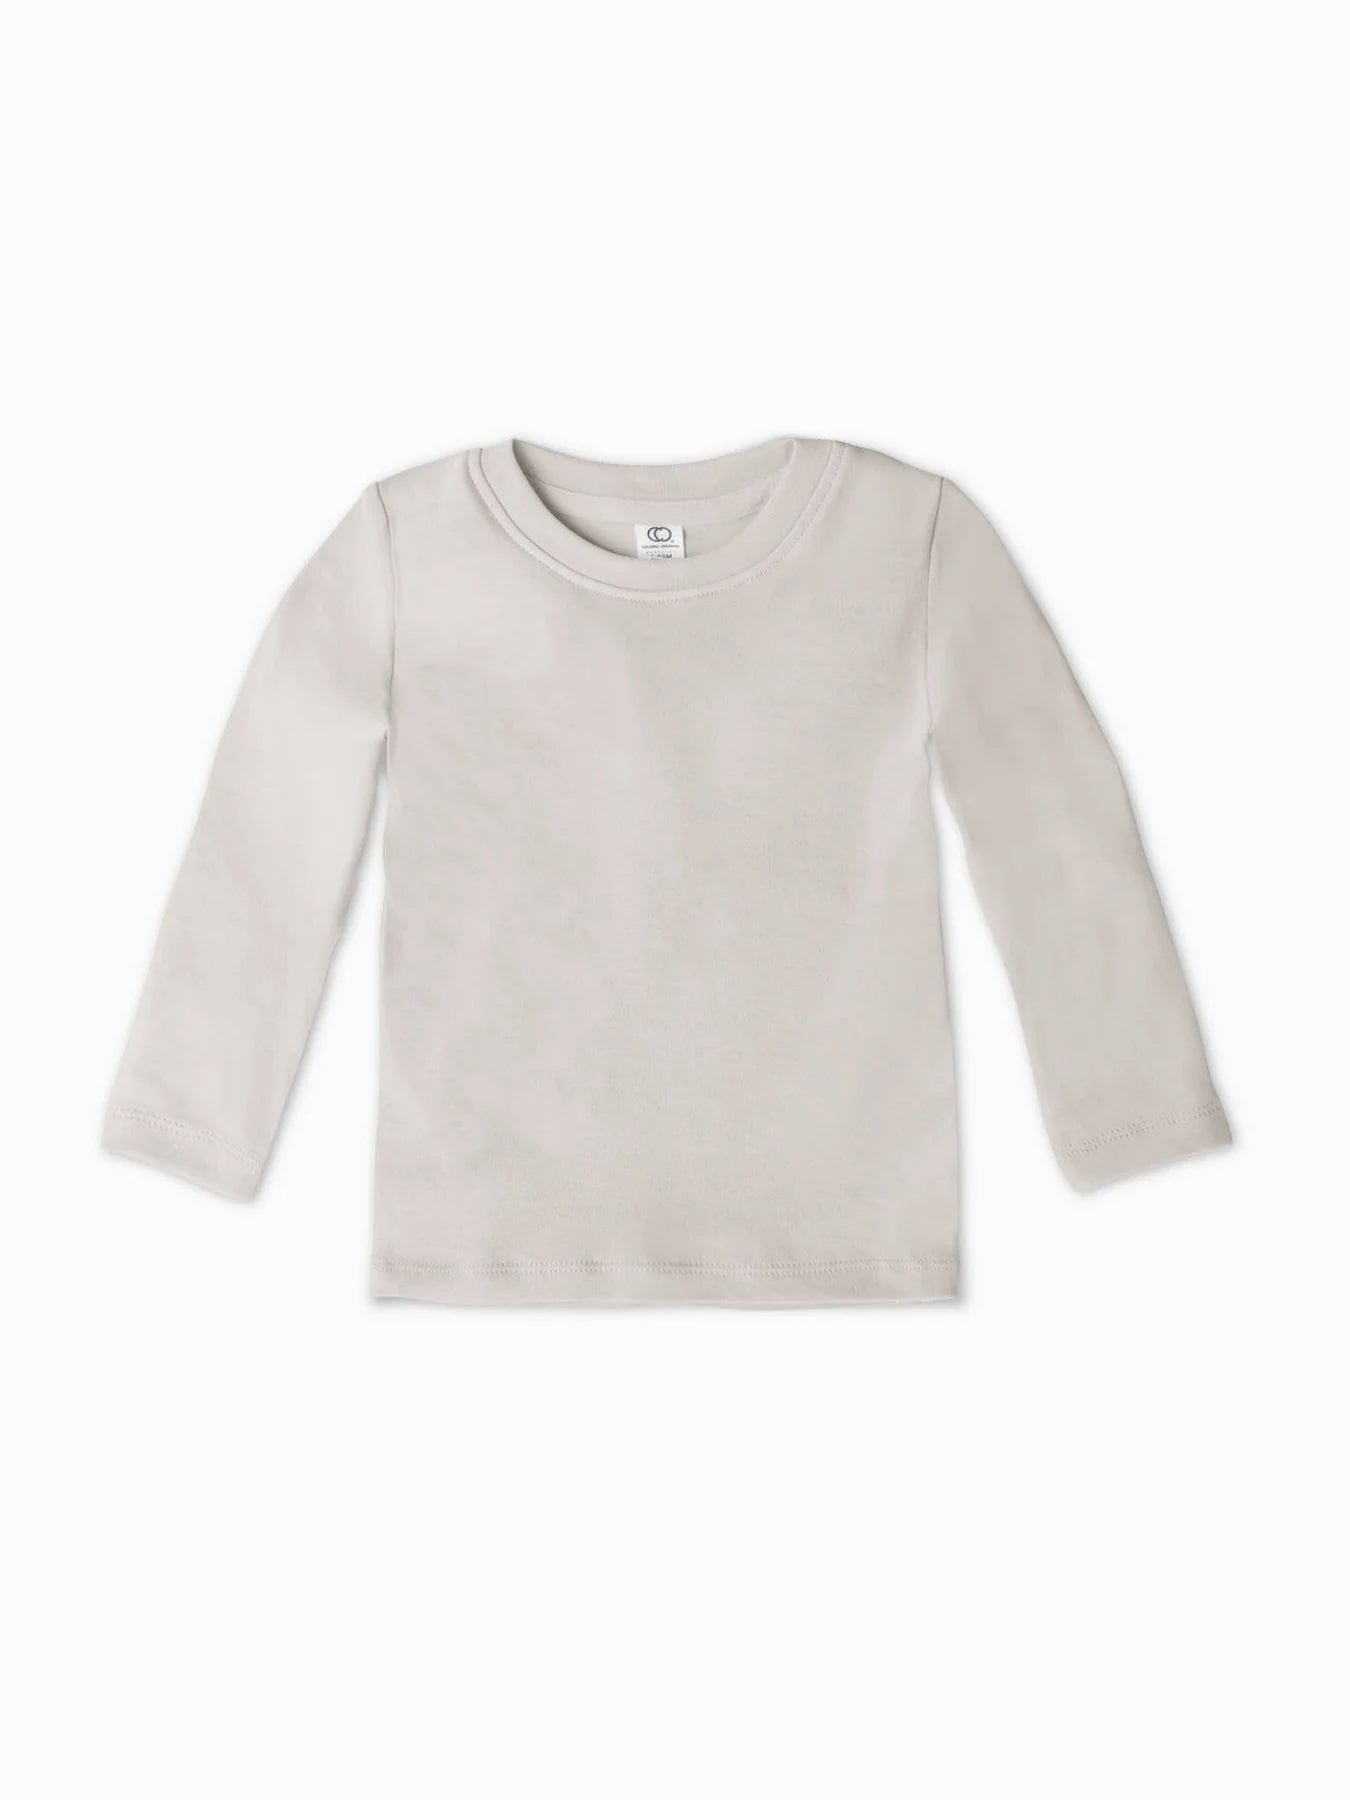 Turk Long Sleeve Crew Neck Shirt in Natural or Stone Color